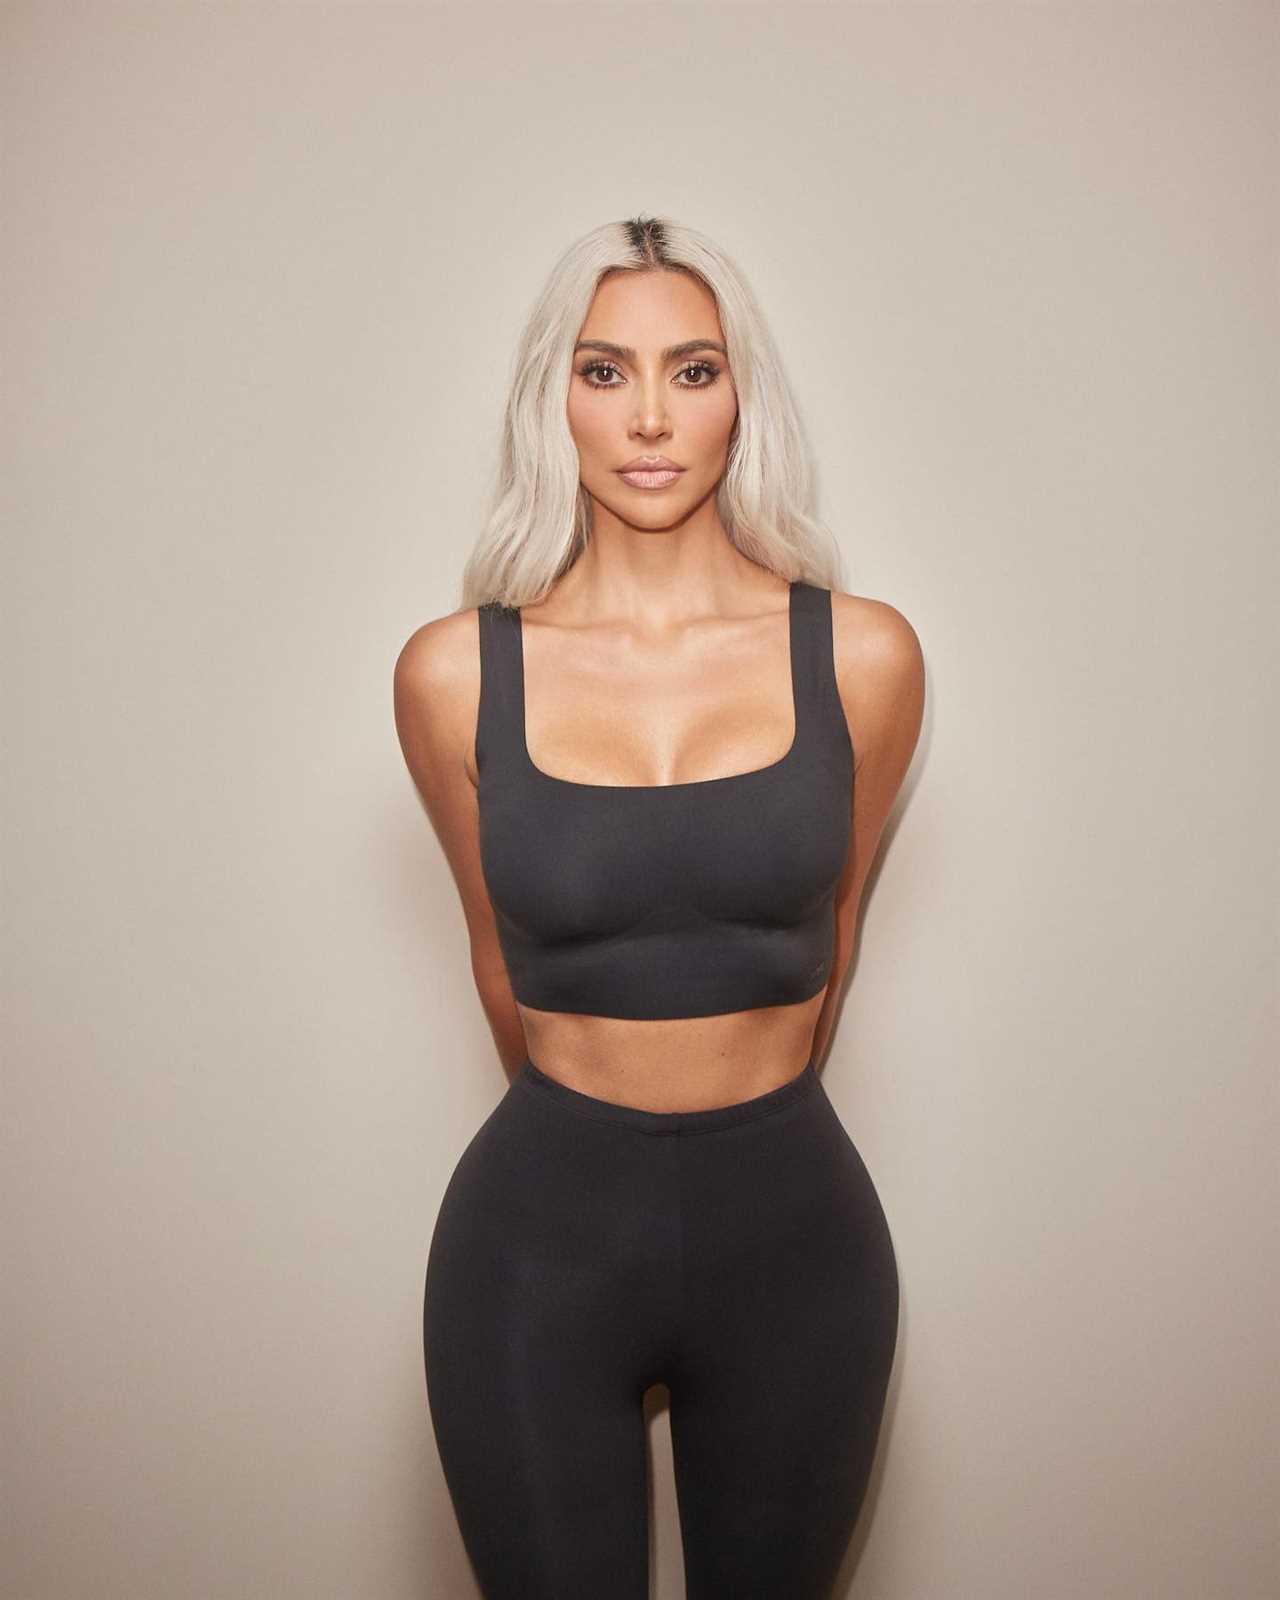 Kim Kardashian shows off her bare butt in leather thong bodysuit and thigh-high boots for racy Stuart Weitzman campaign